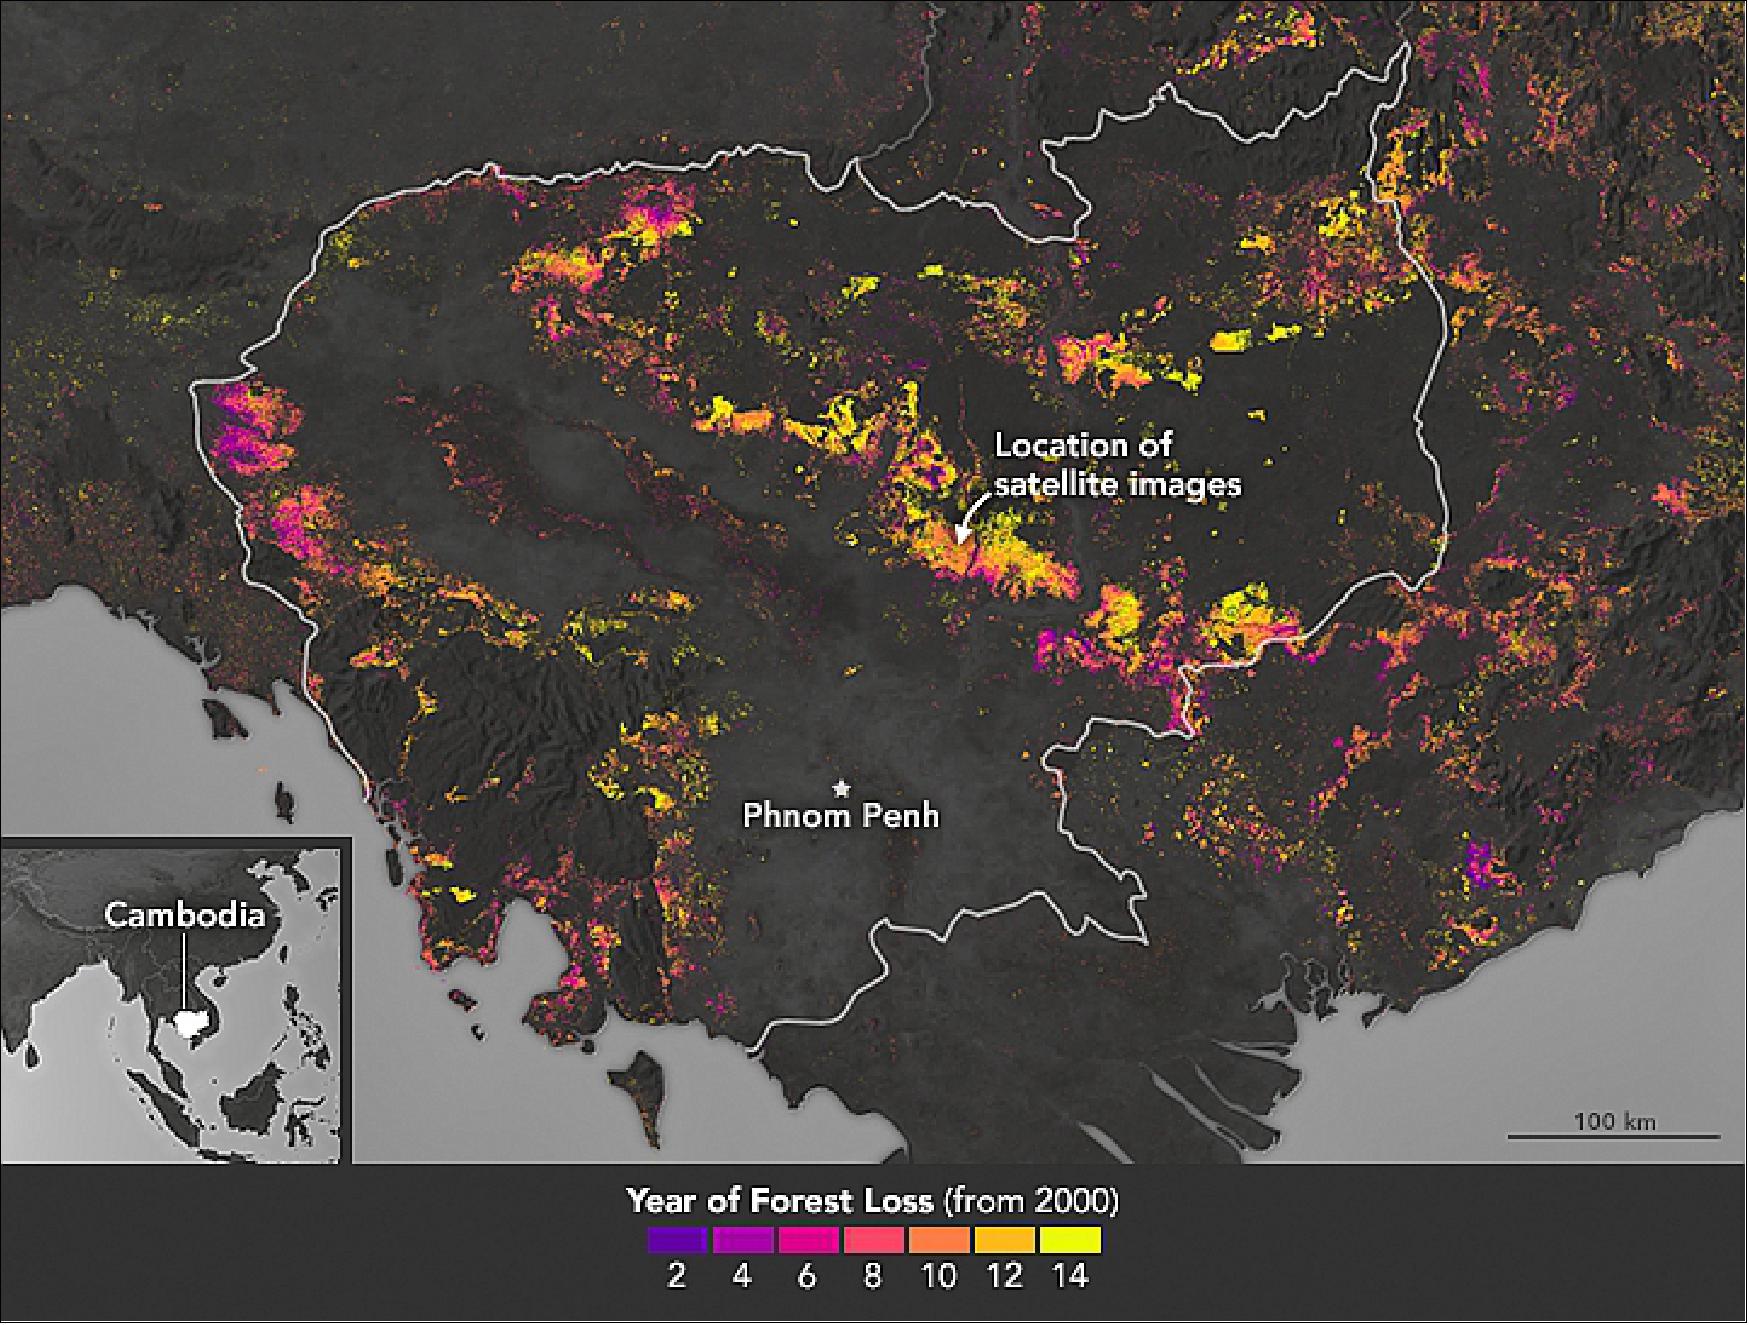 Figure 37: This map, based on Hansen's work, depicts the extent of forest loss throughout Cambodia between 2000 and 2014 (image credit: NASA Earth Observatory)